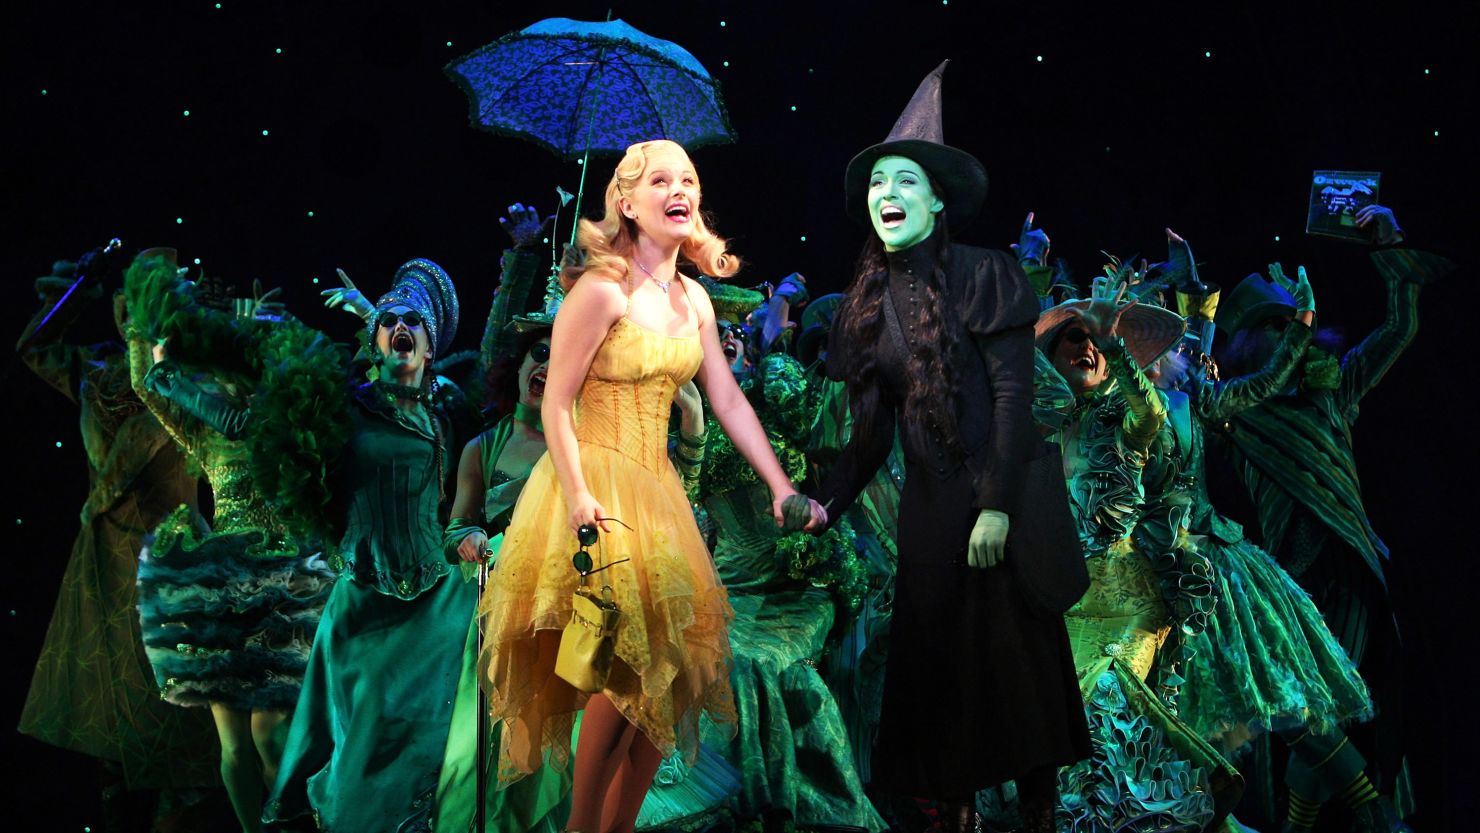 'Wicked' the movie will appear in theaters in 2019